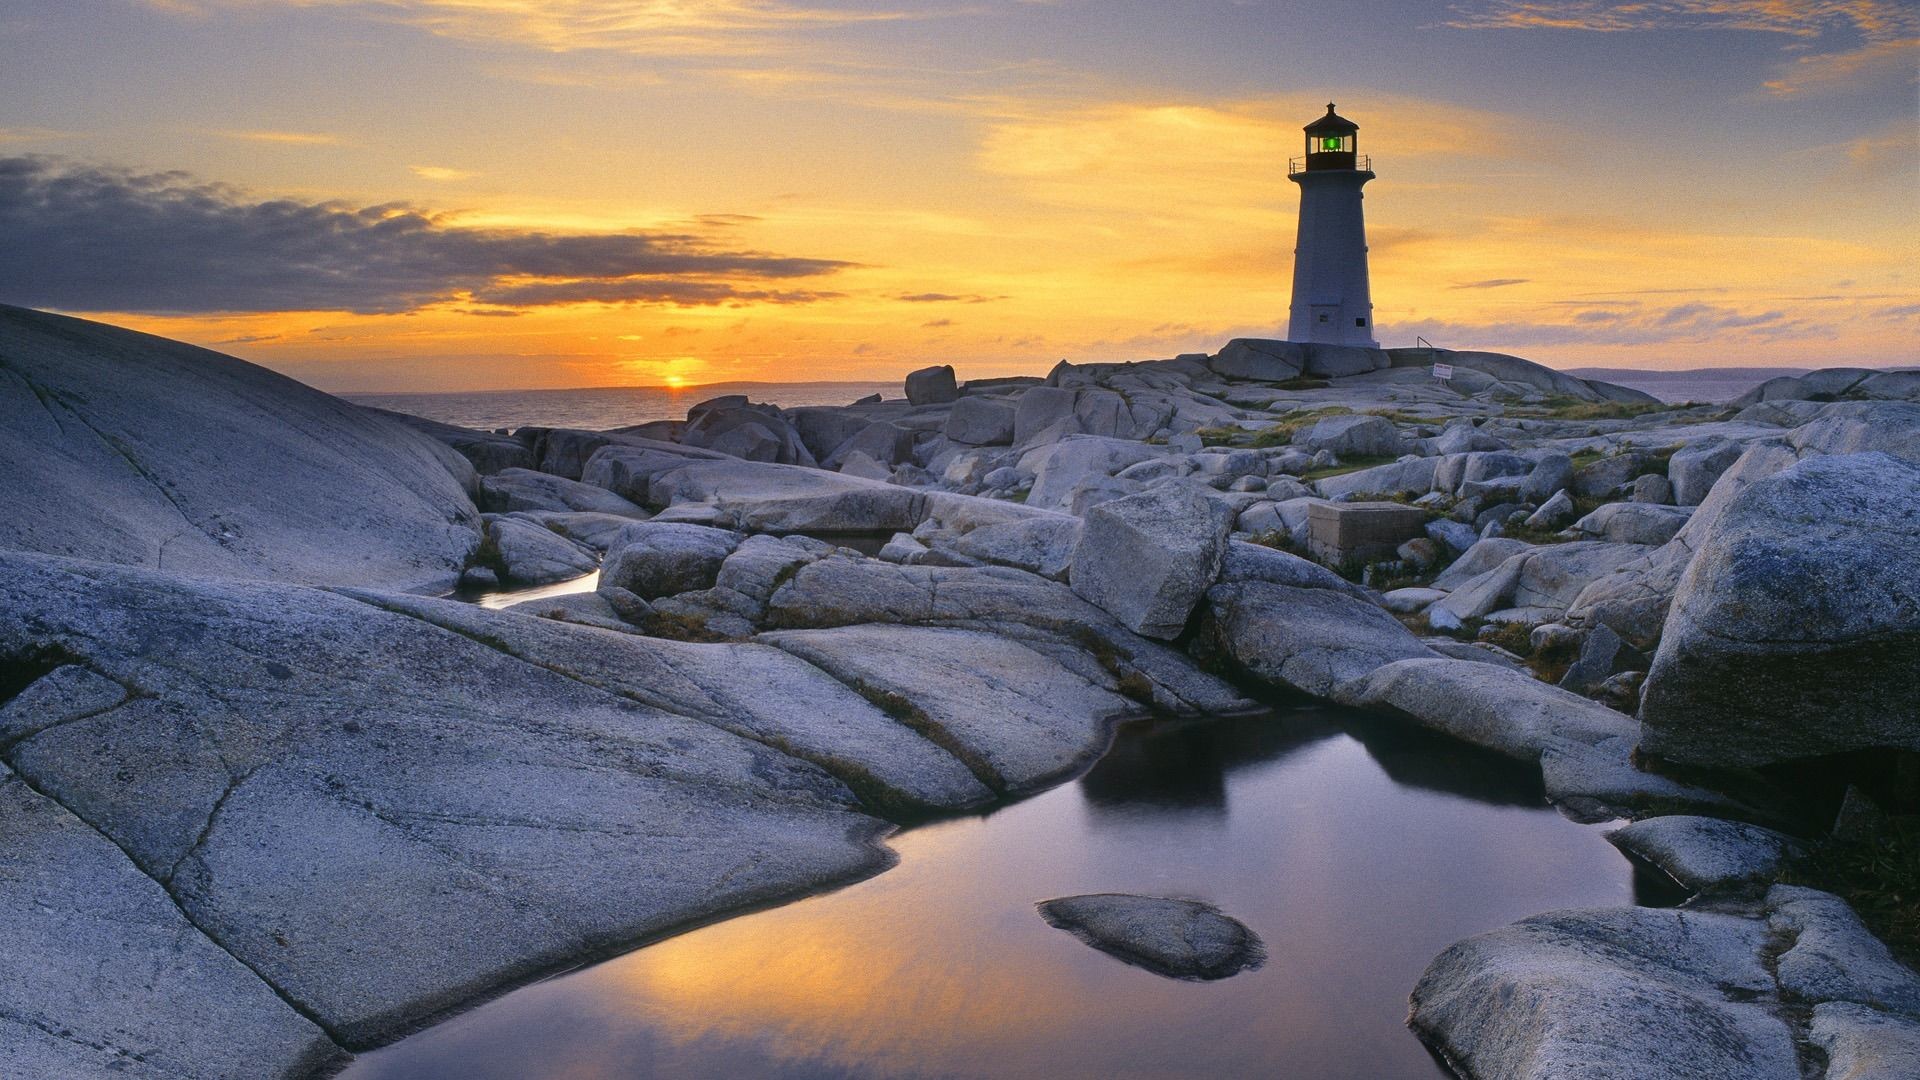 1920x1080 Lighthouse Wallpapers Free (46 Wallpapers)